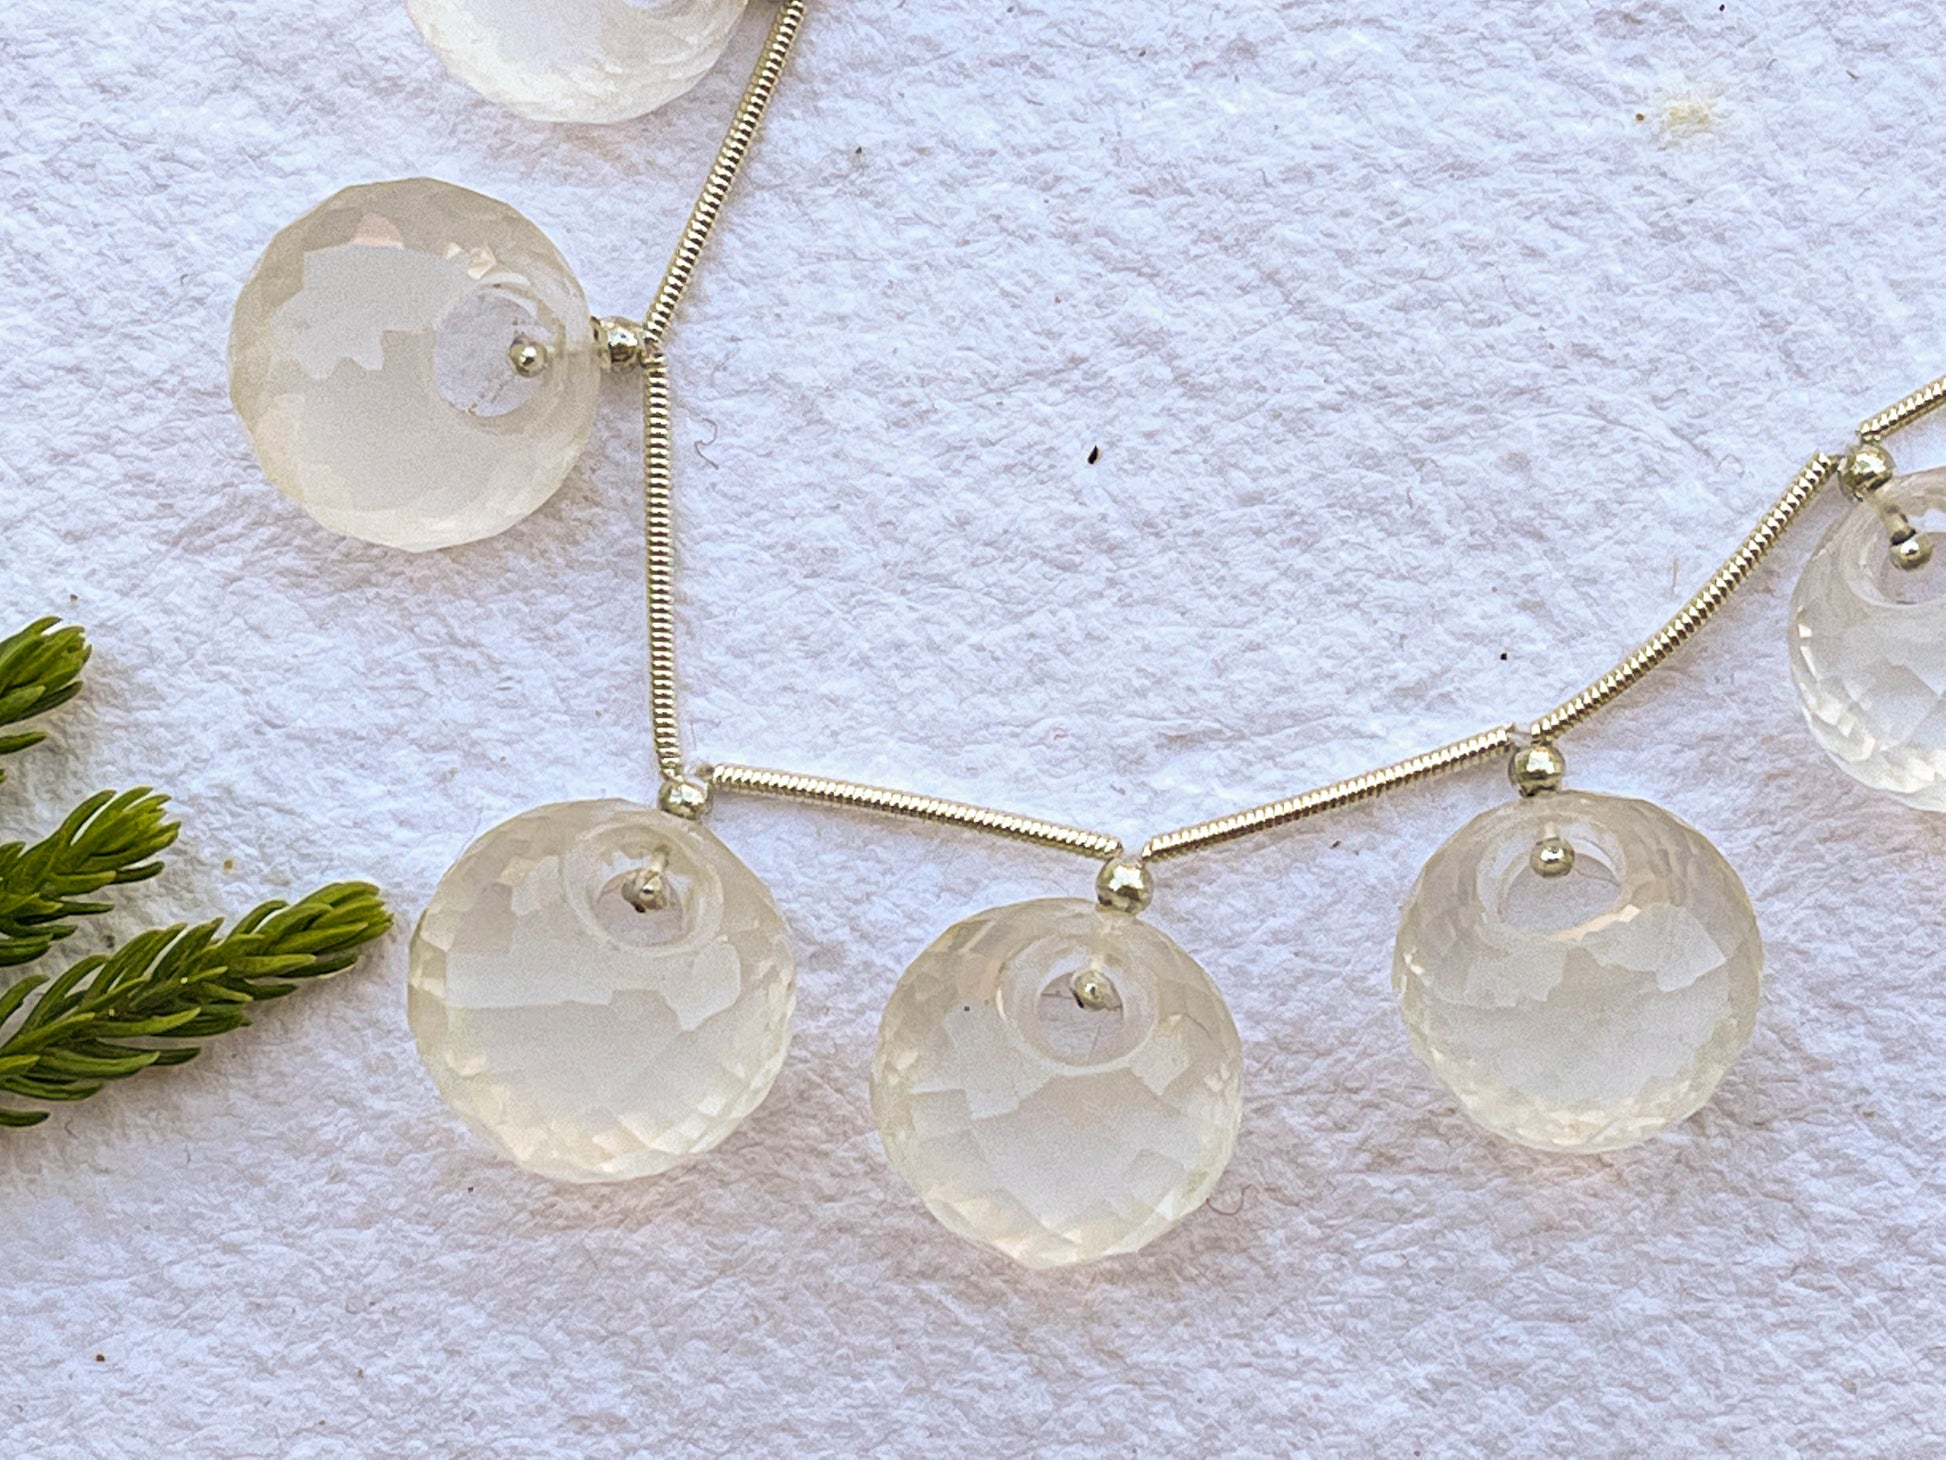 Ice quartz Faceted Round Hoop Shape Beads Beadsforyourjewelry